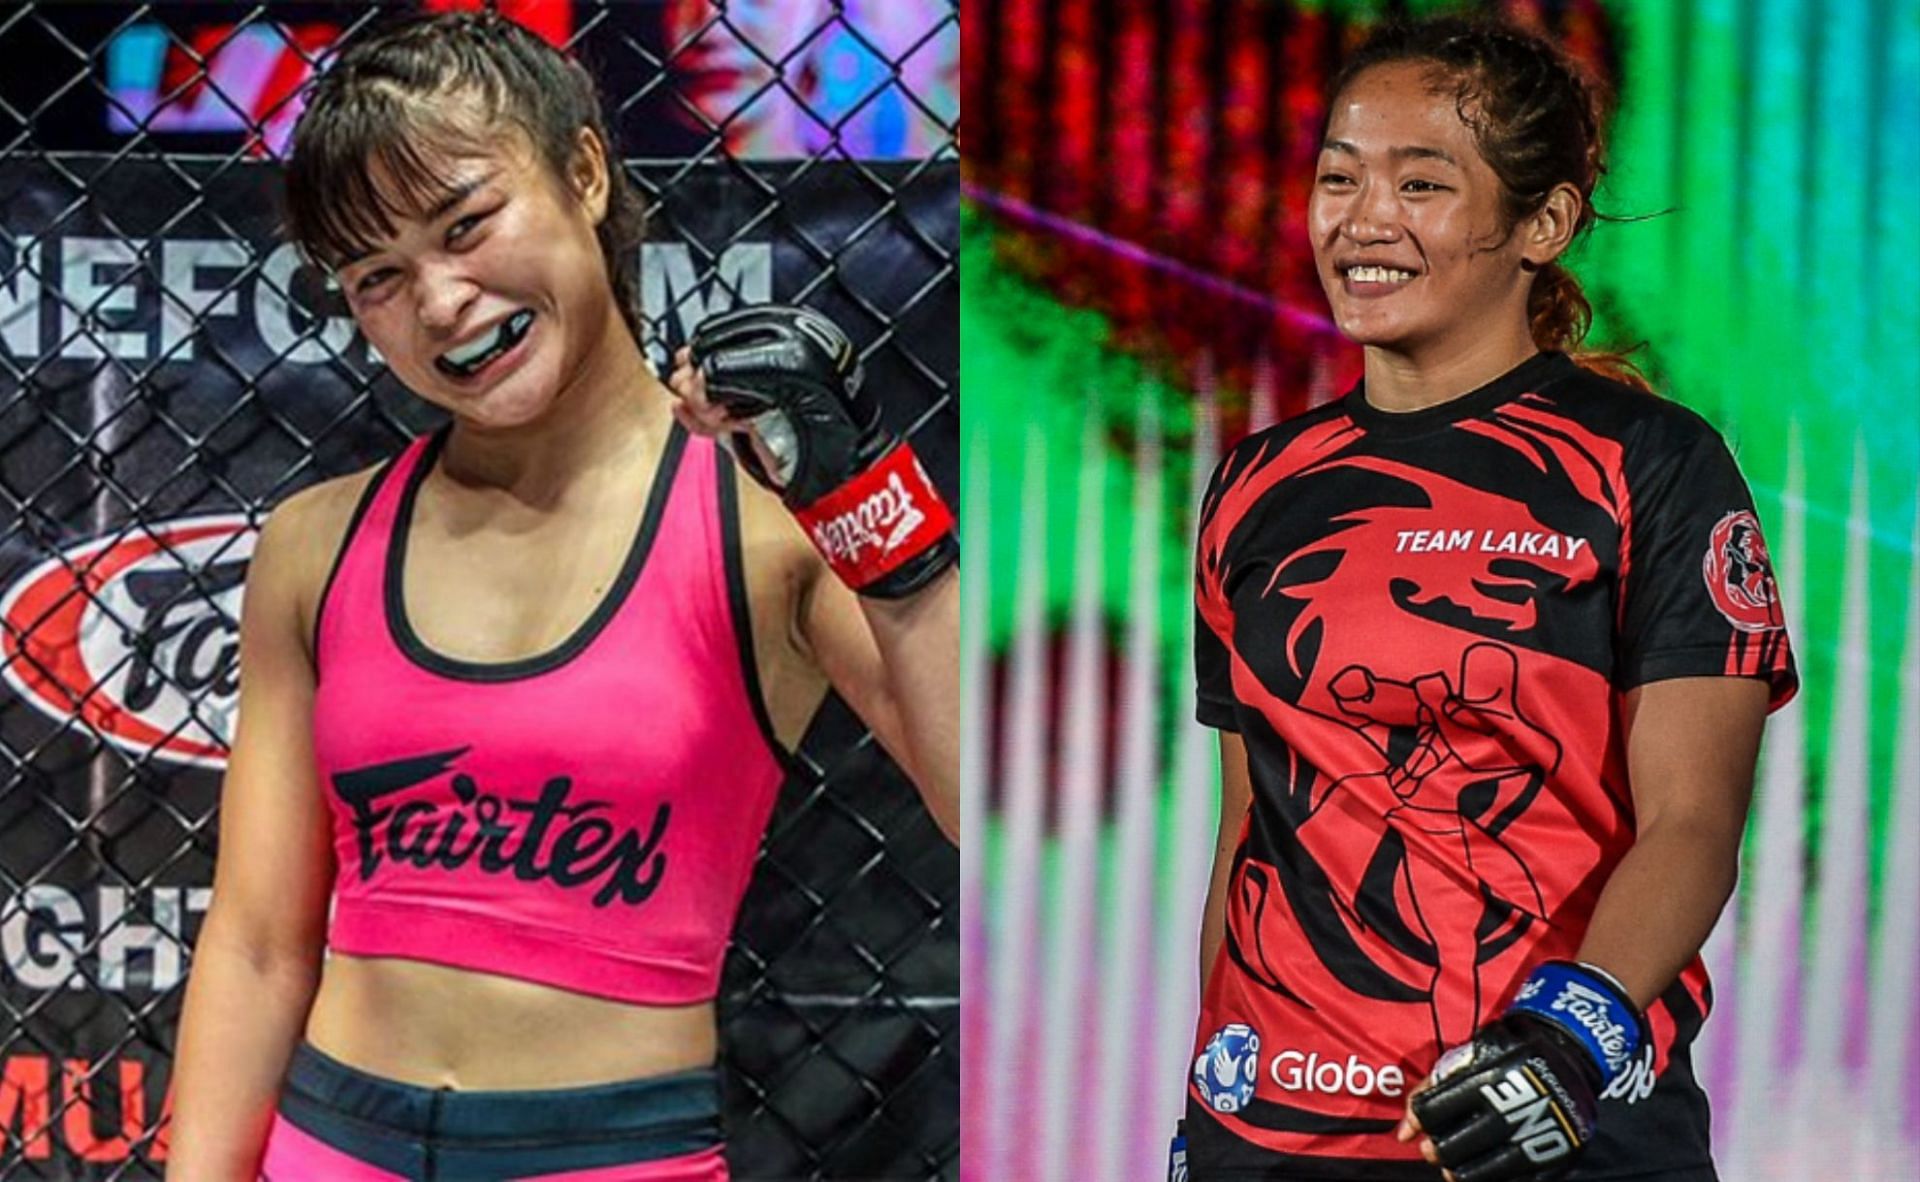 Stamp Fairtex (left) and Jenelyn Olsim (right) [Photo Credit: ONE Championship]